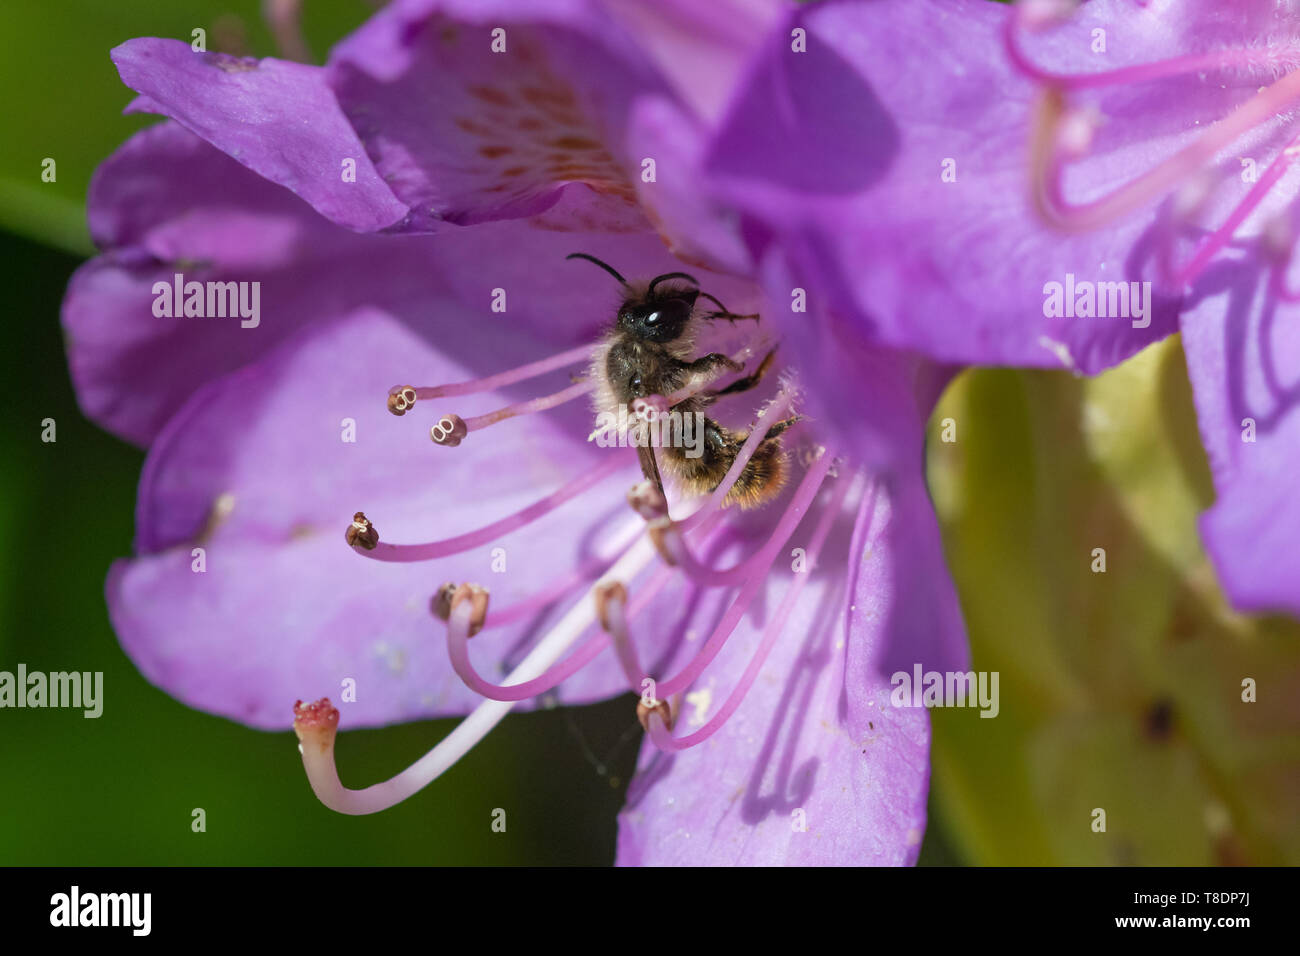 Solitary bee on rhododendron flower Stock Photo